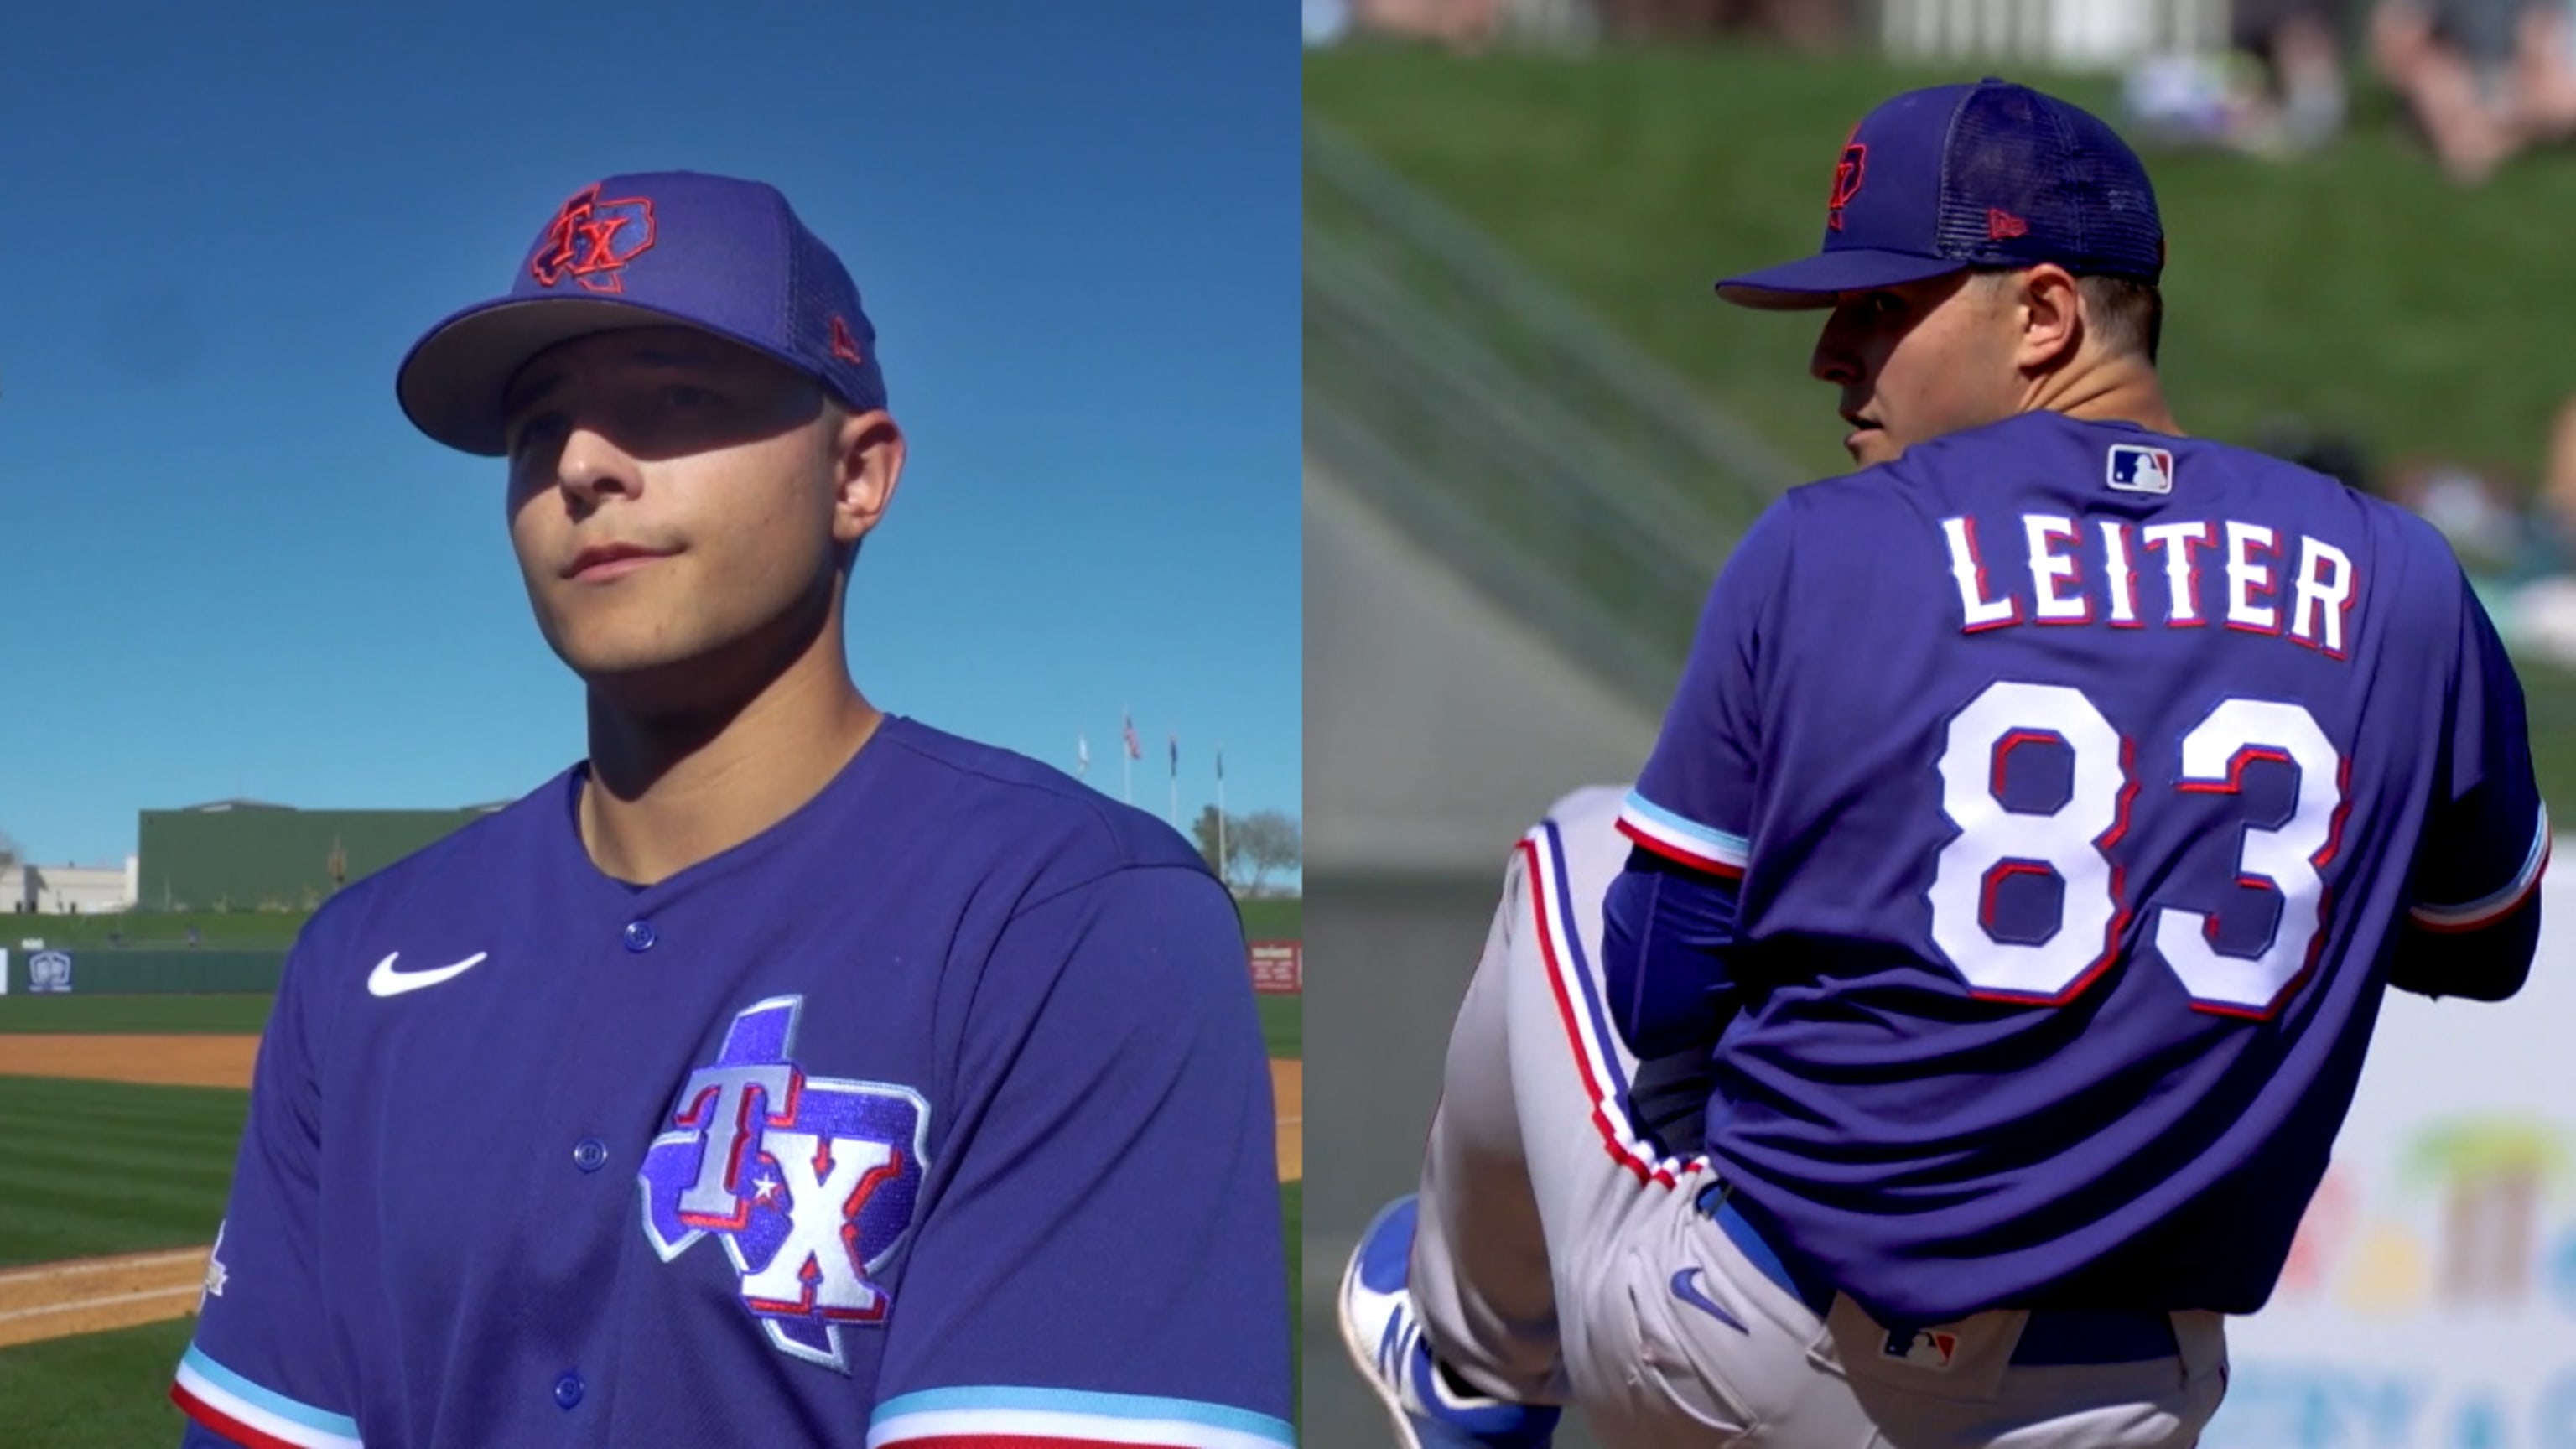 Texas Rangers on X: New BP caps have arrived! Get yours now in